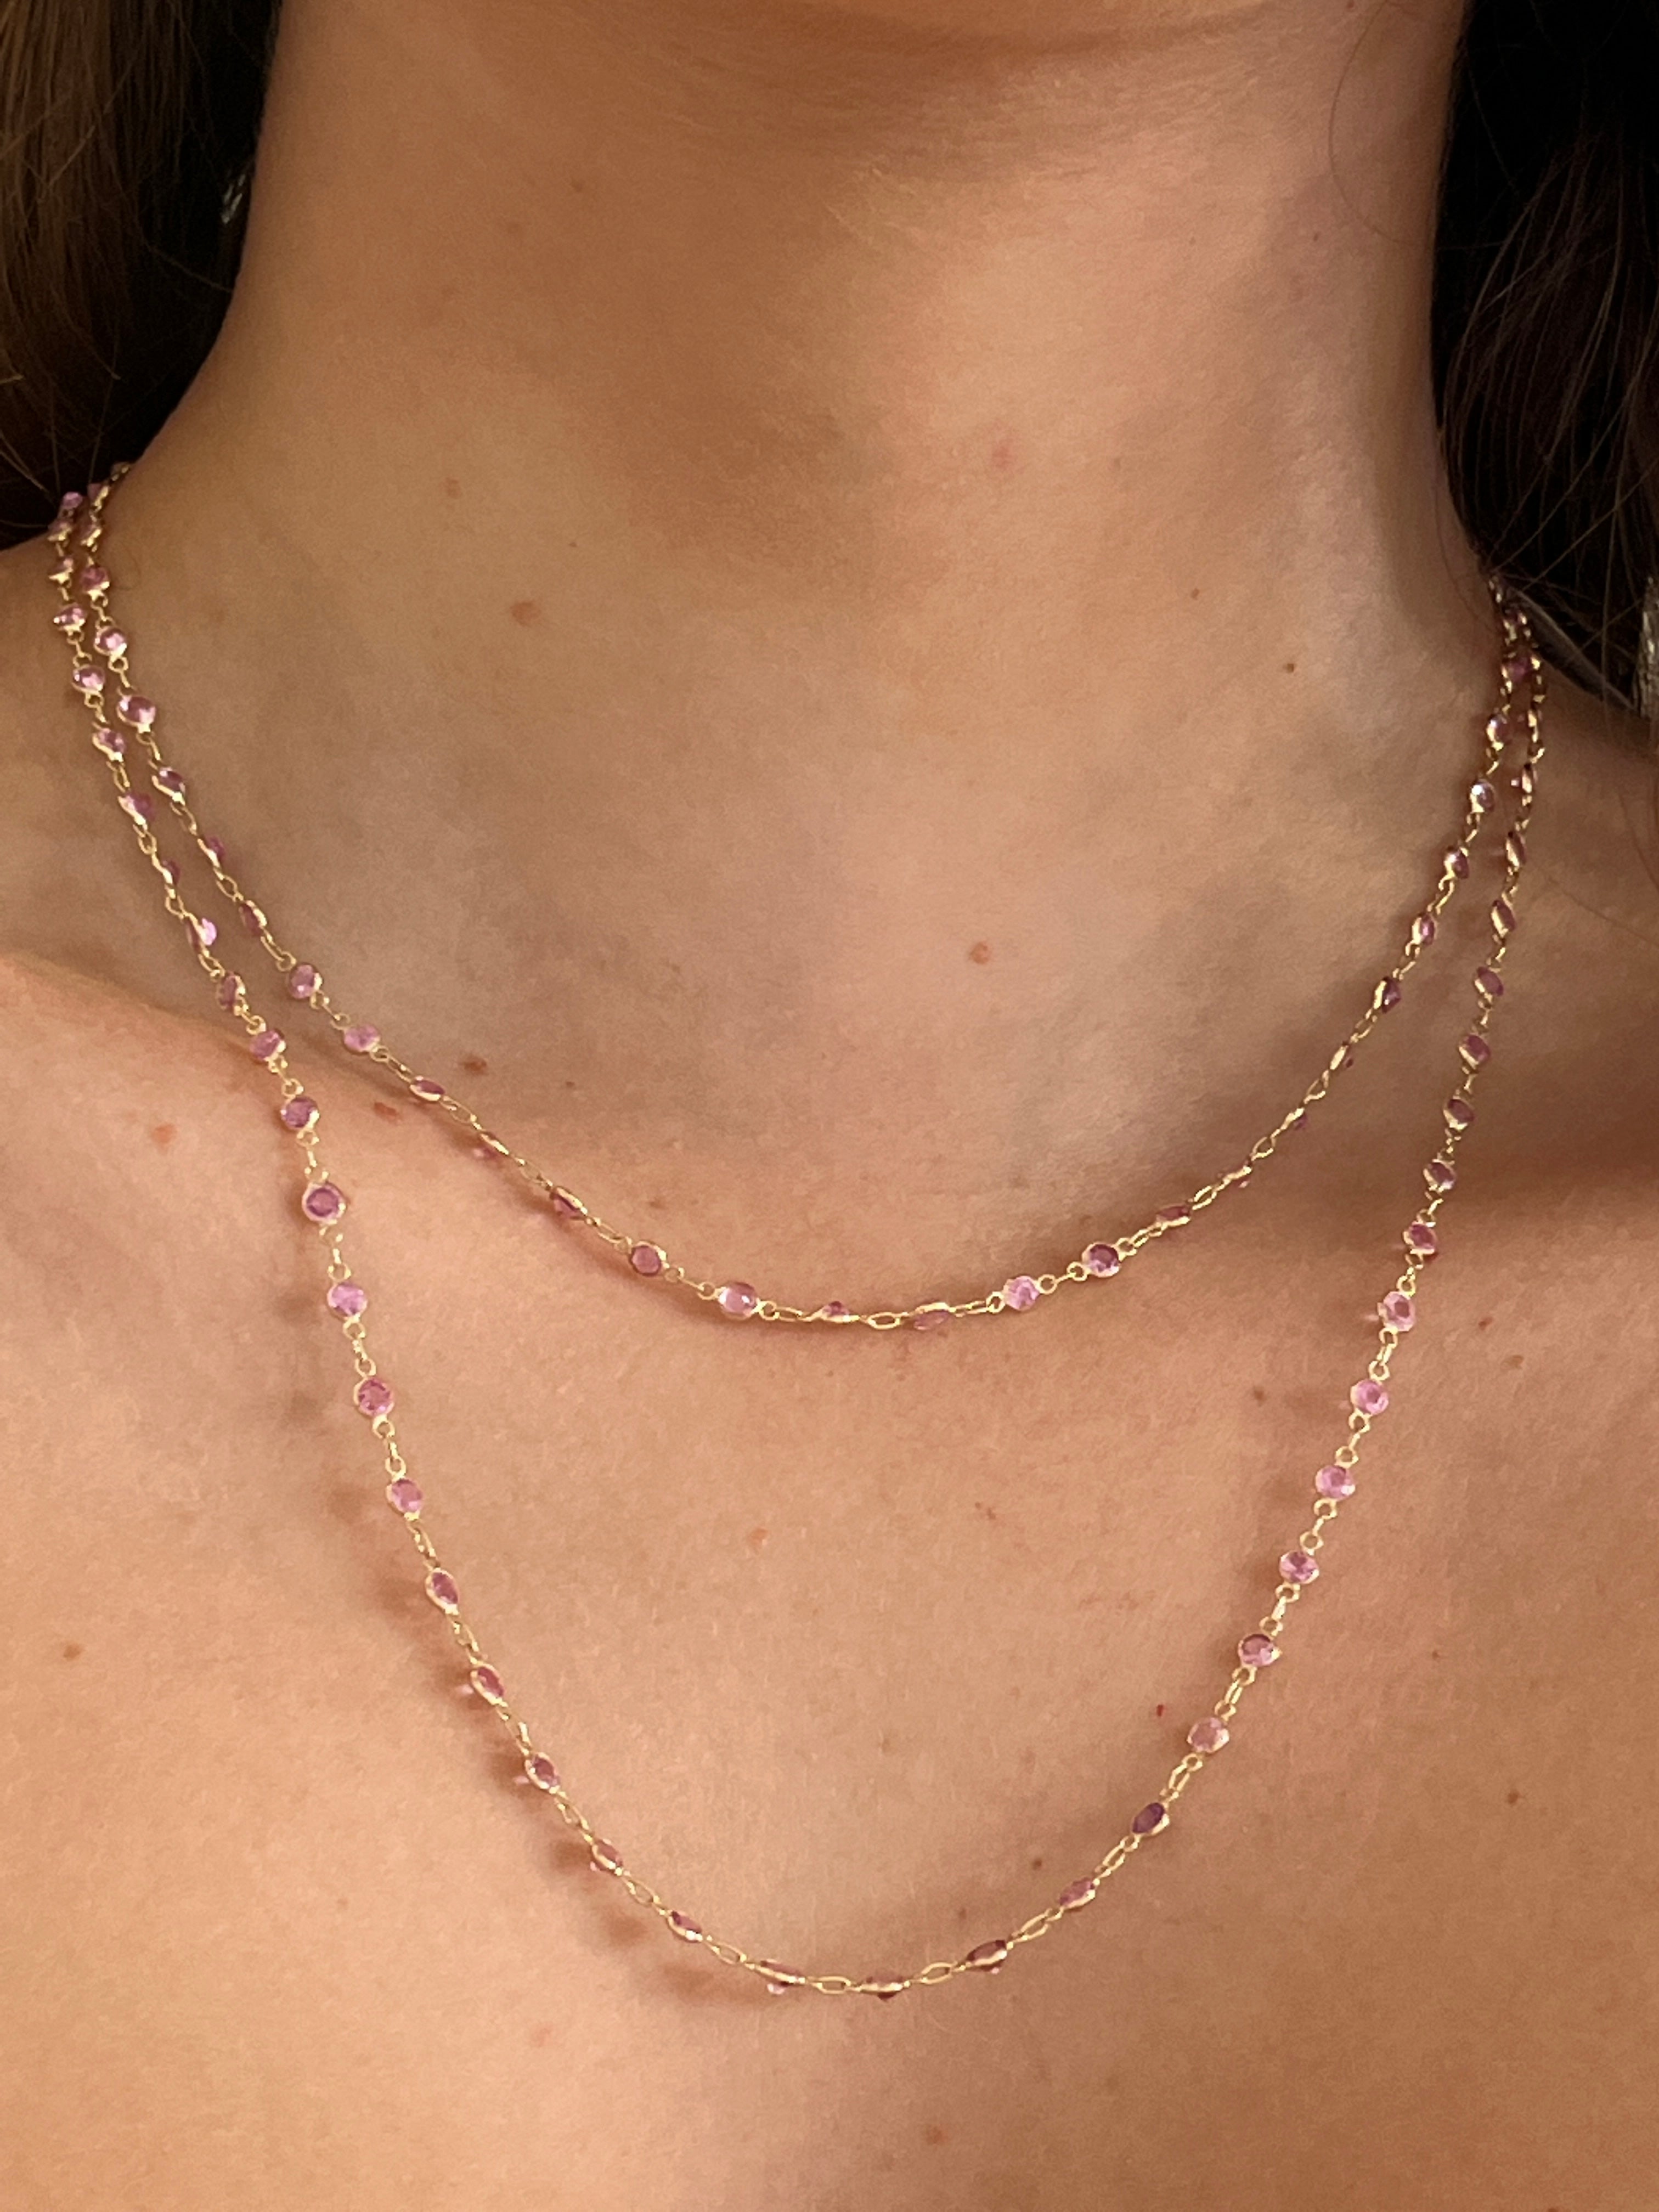 WD1012 14kt Pink Sapphire by the Yard Necklace